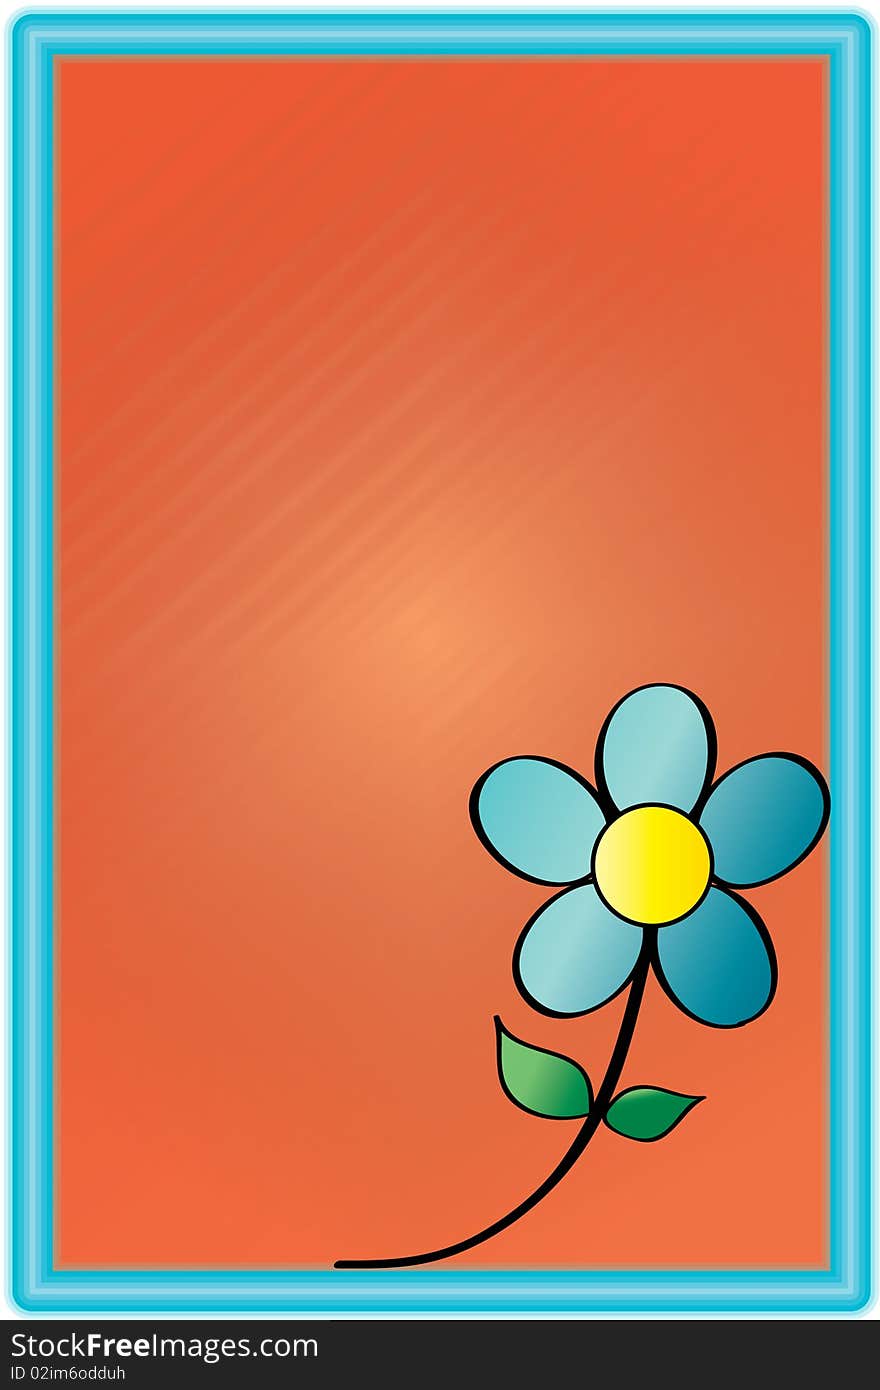 Turquoise blue neon frame with gradient orange background and blue flower on the botton right corner. Turquoise blue neon frame with gradient orange background and blue flower on the botton right corner